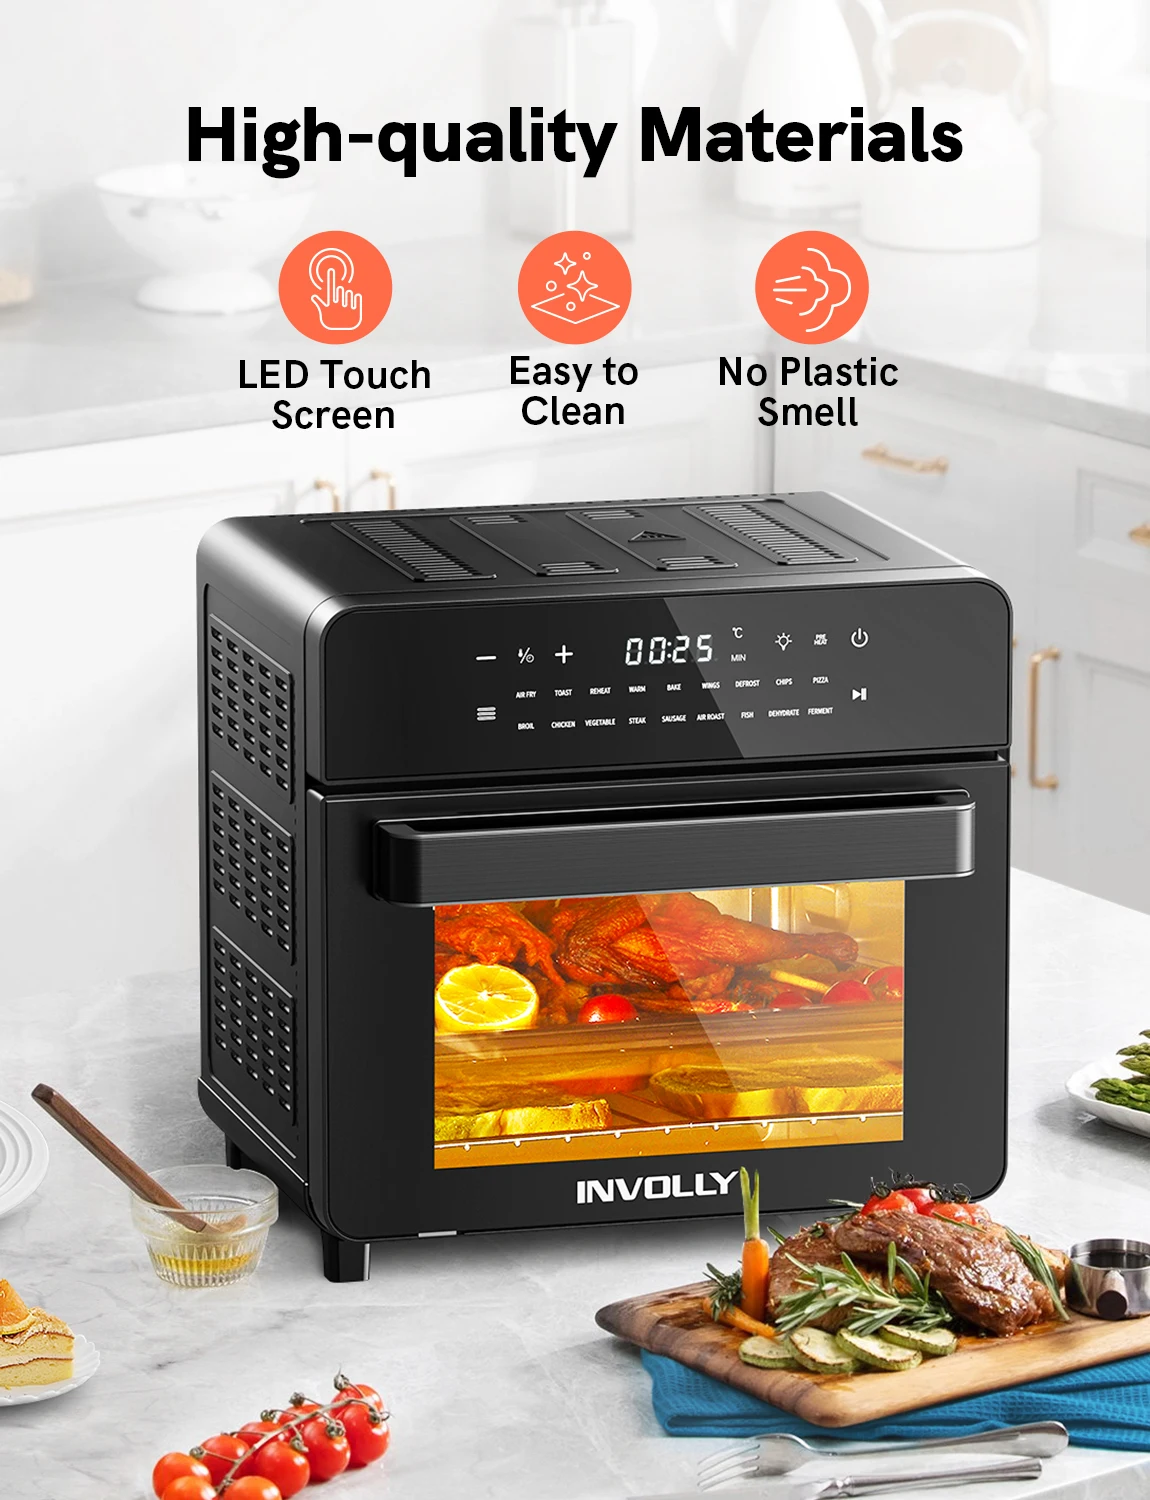 https://ae01.alicdn.com/kf/Sf055b87324714b7bb78935fd8cab2e07W/INVOLLY-Kitchen-Air-Fryer-Oven-15L-Olil-Free-Fryer-with-18-Programs-Keep-Warm-Function-Touch.jpg